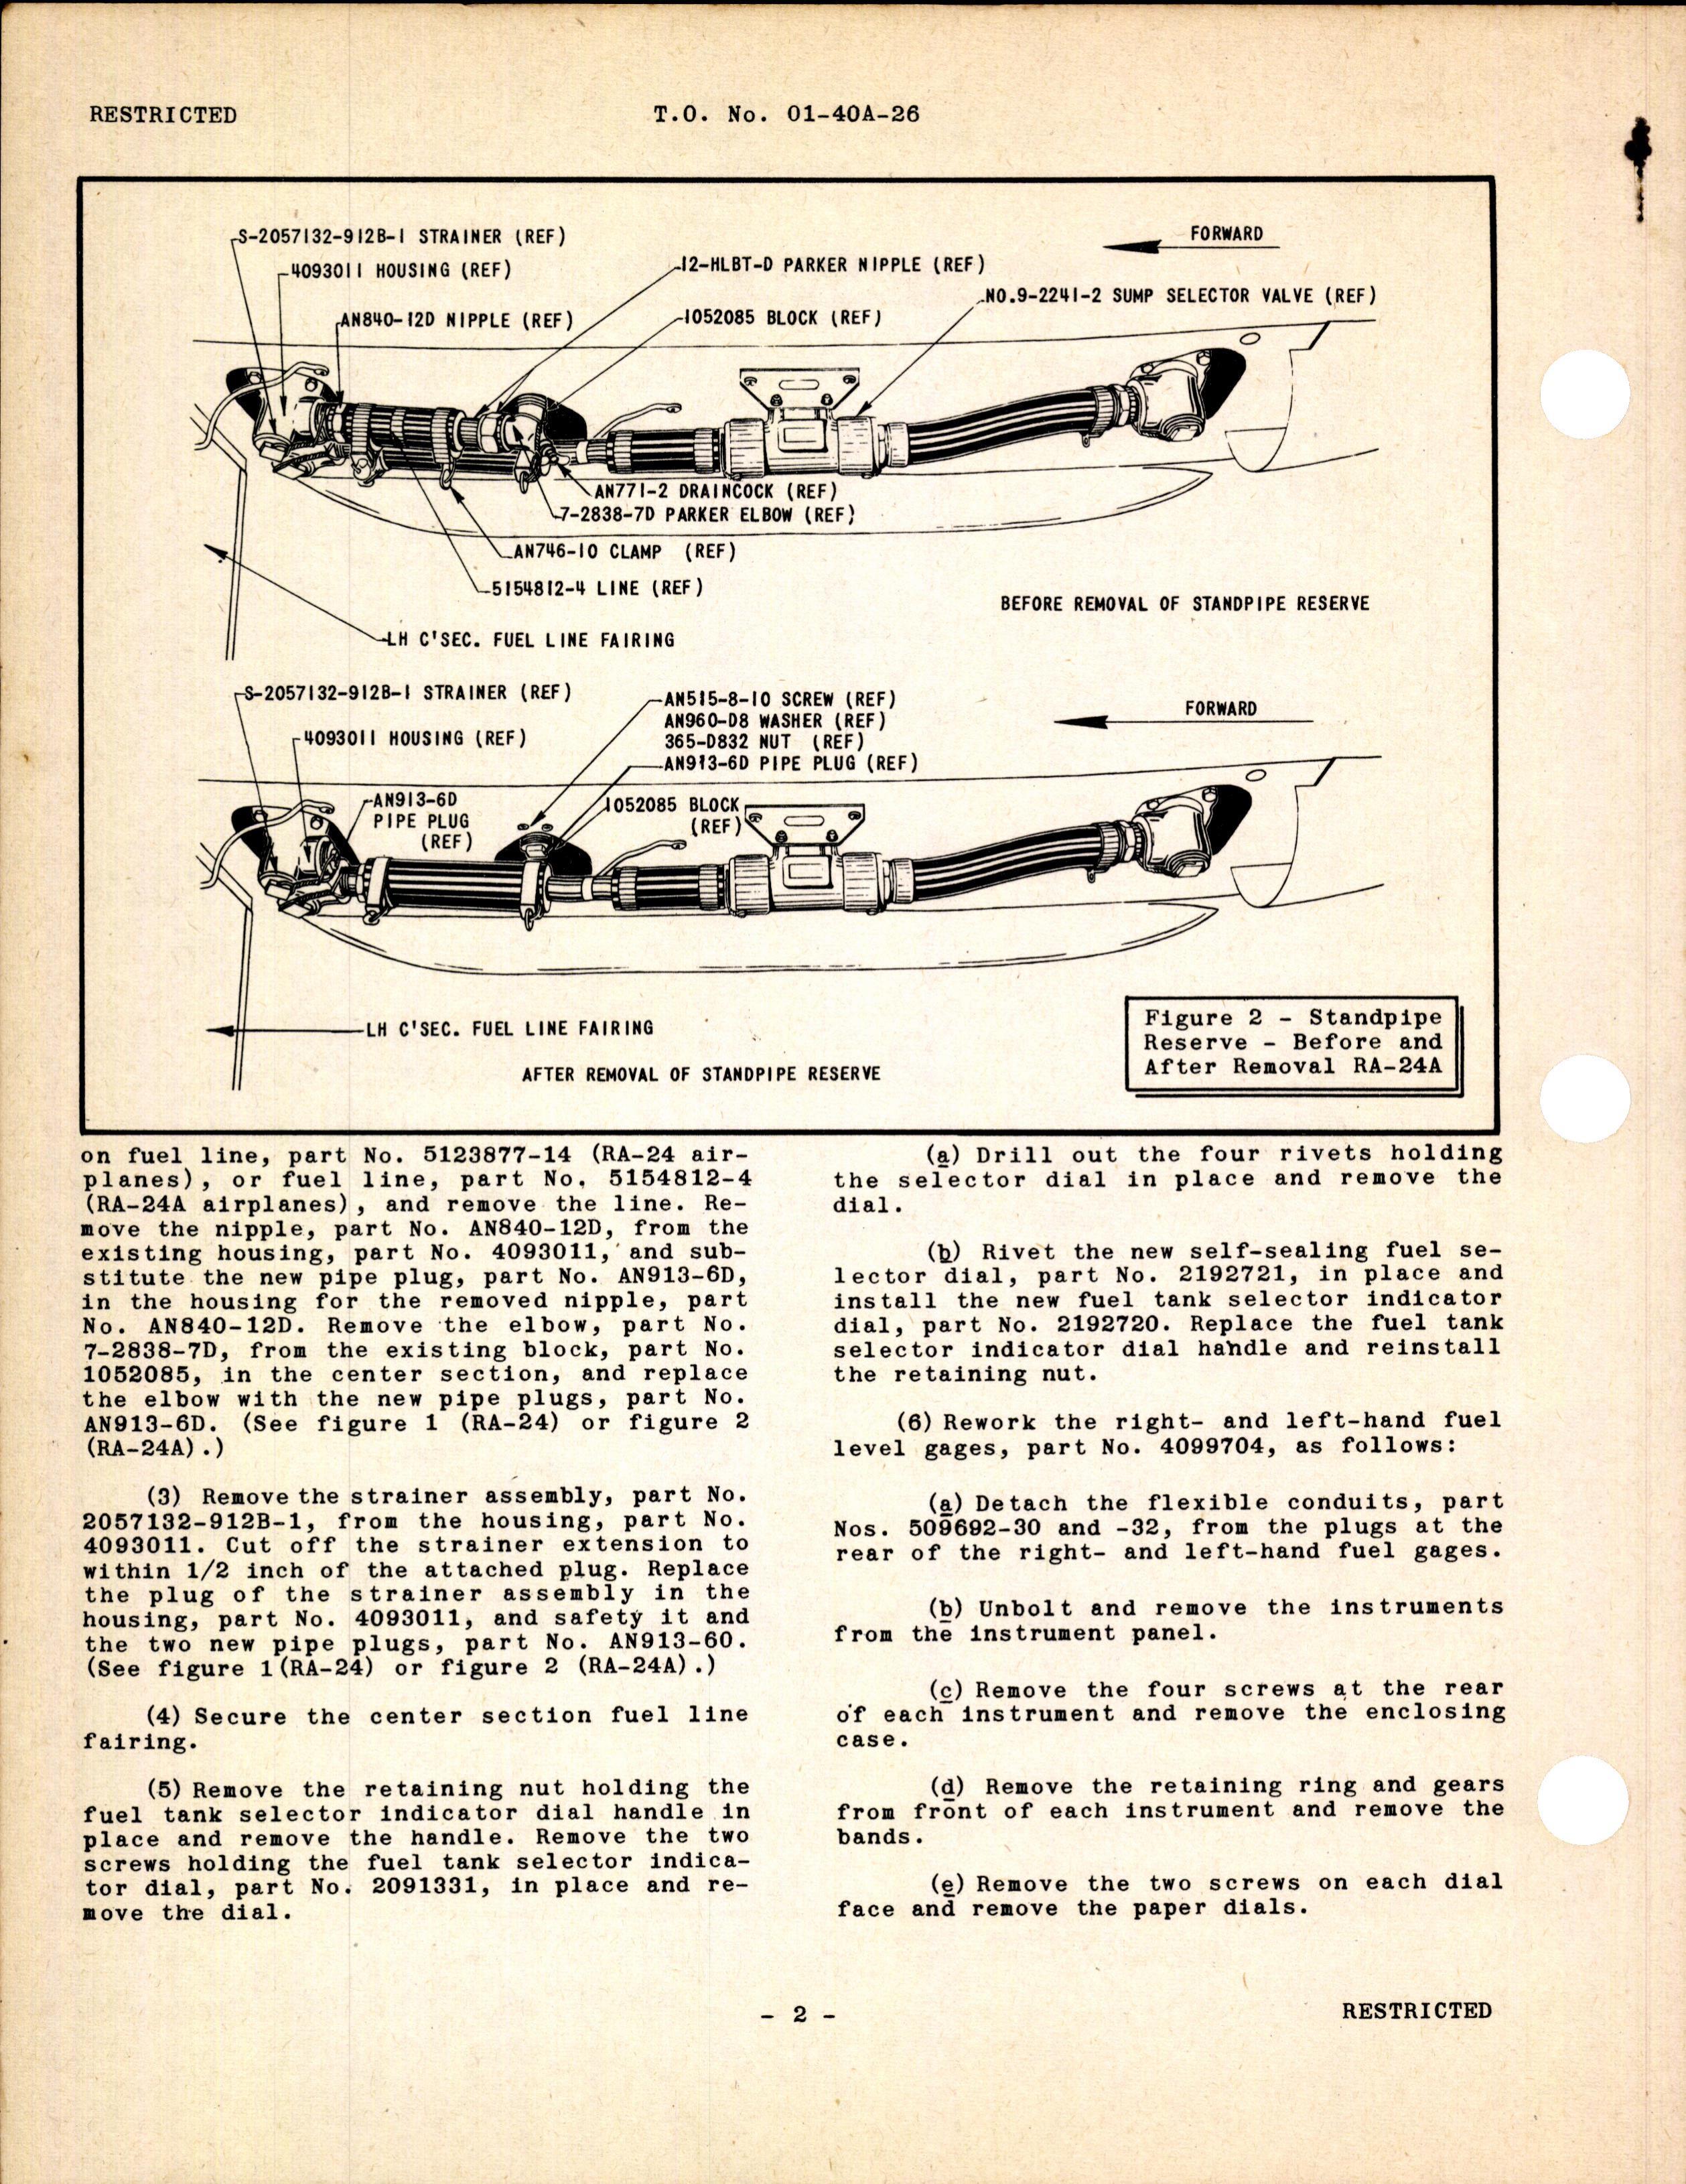 Sample page 2 from AirCorps Library document: Removal of Standpipe Reserve From Left-Hand Main Fuel Tank for RA-24 and RA-24A